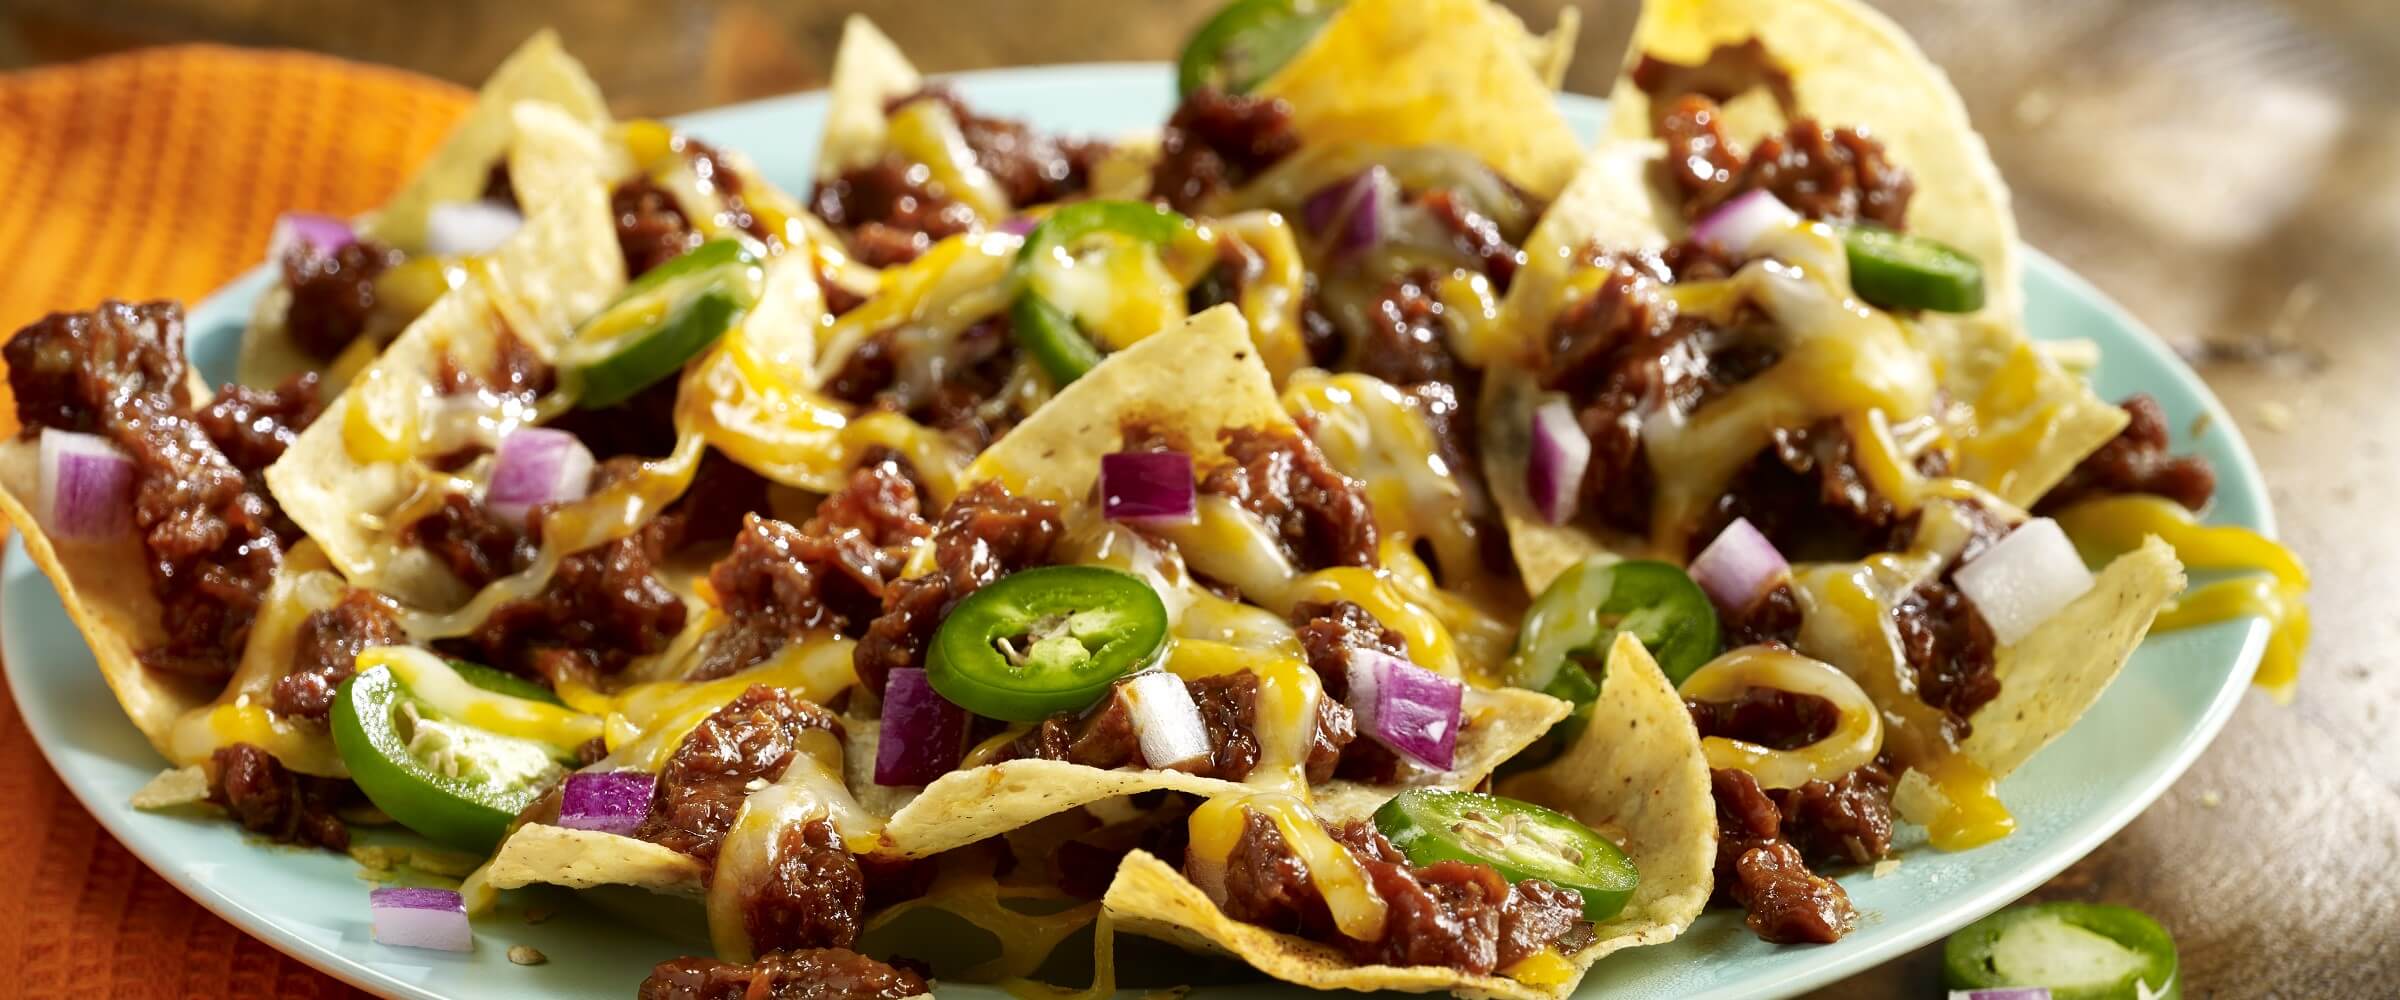 BBQ pork nachos on plate topped with cheese, red onion and jalapenos